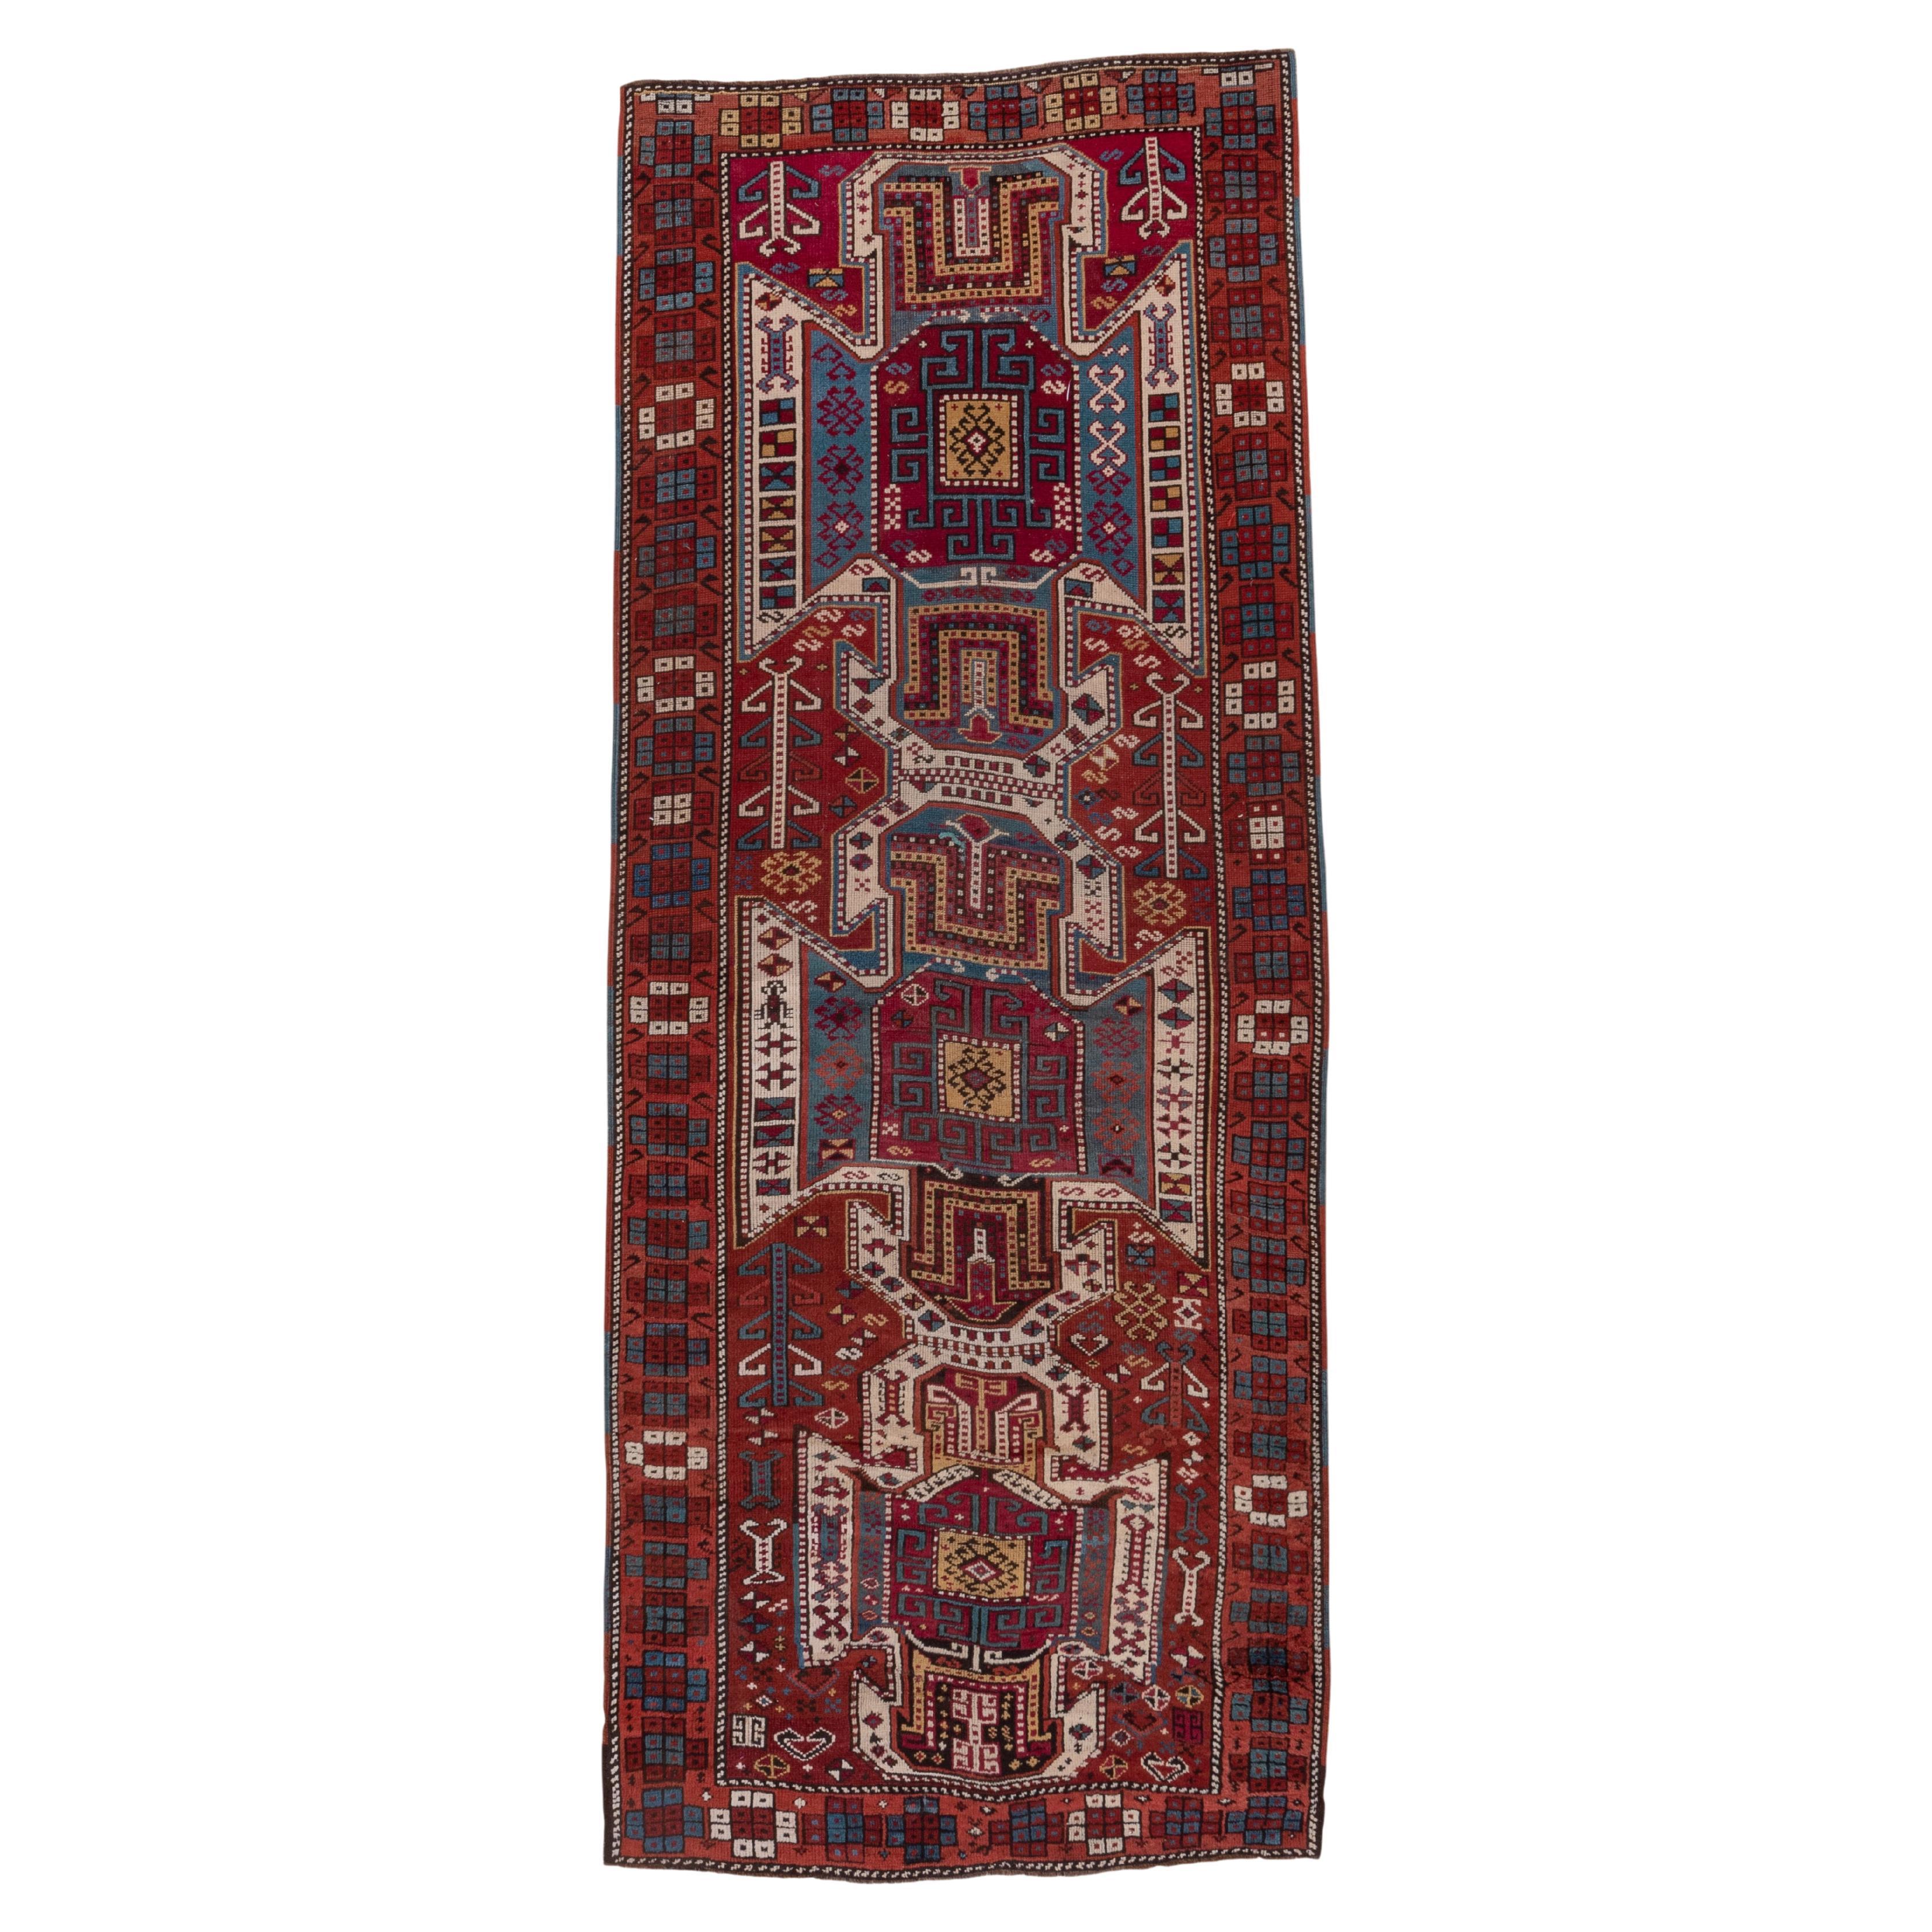 Bright Toned Antique Caucasian Kazak Style Wide Runner, Colorful and Bold Tones